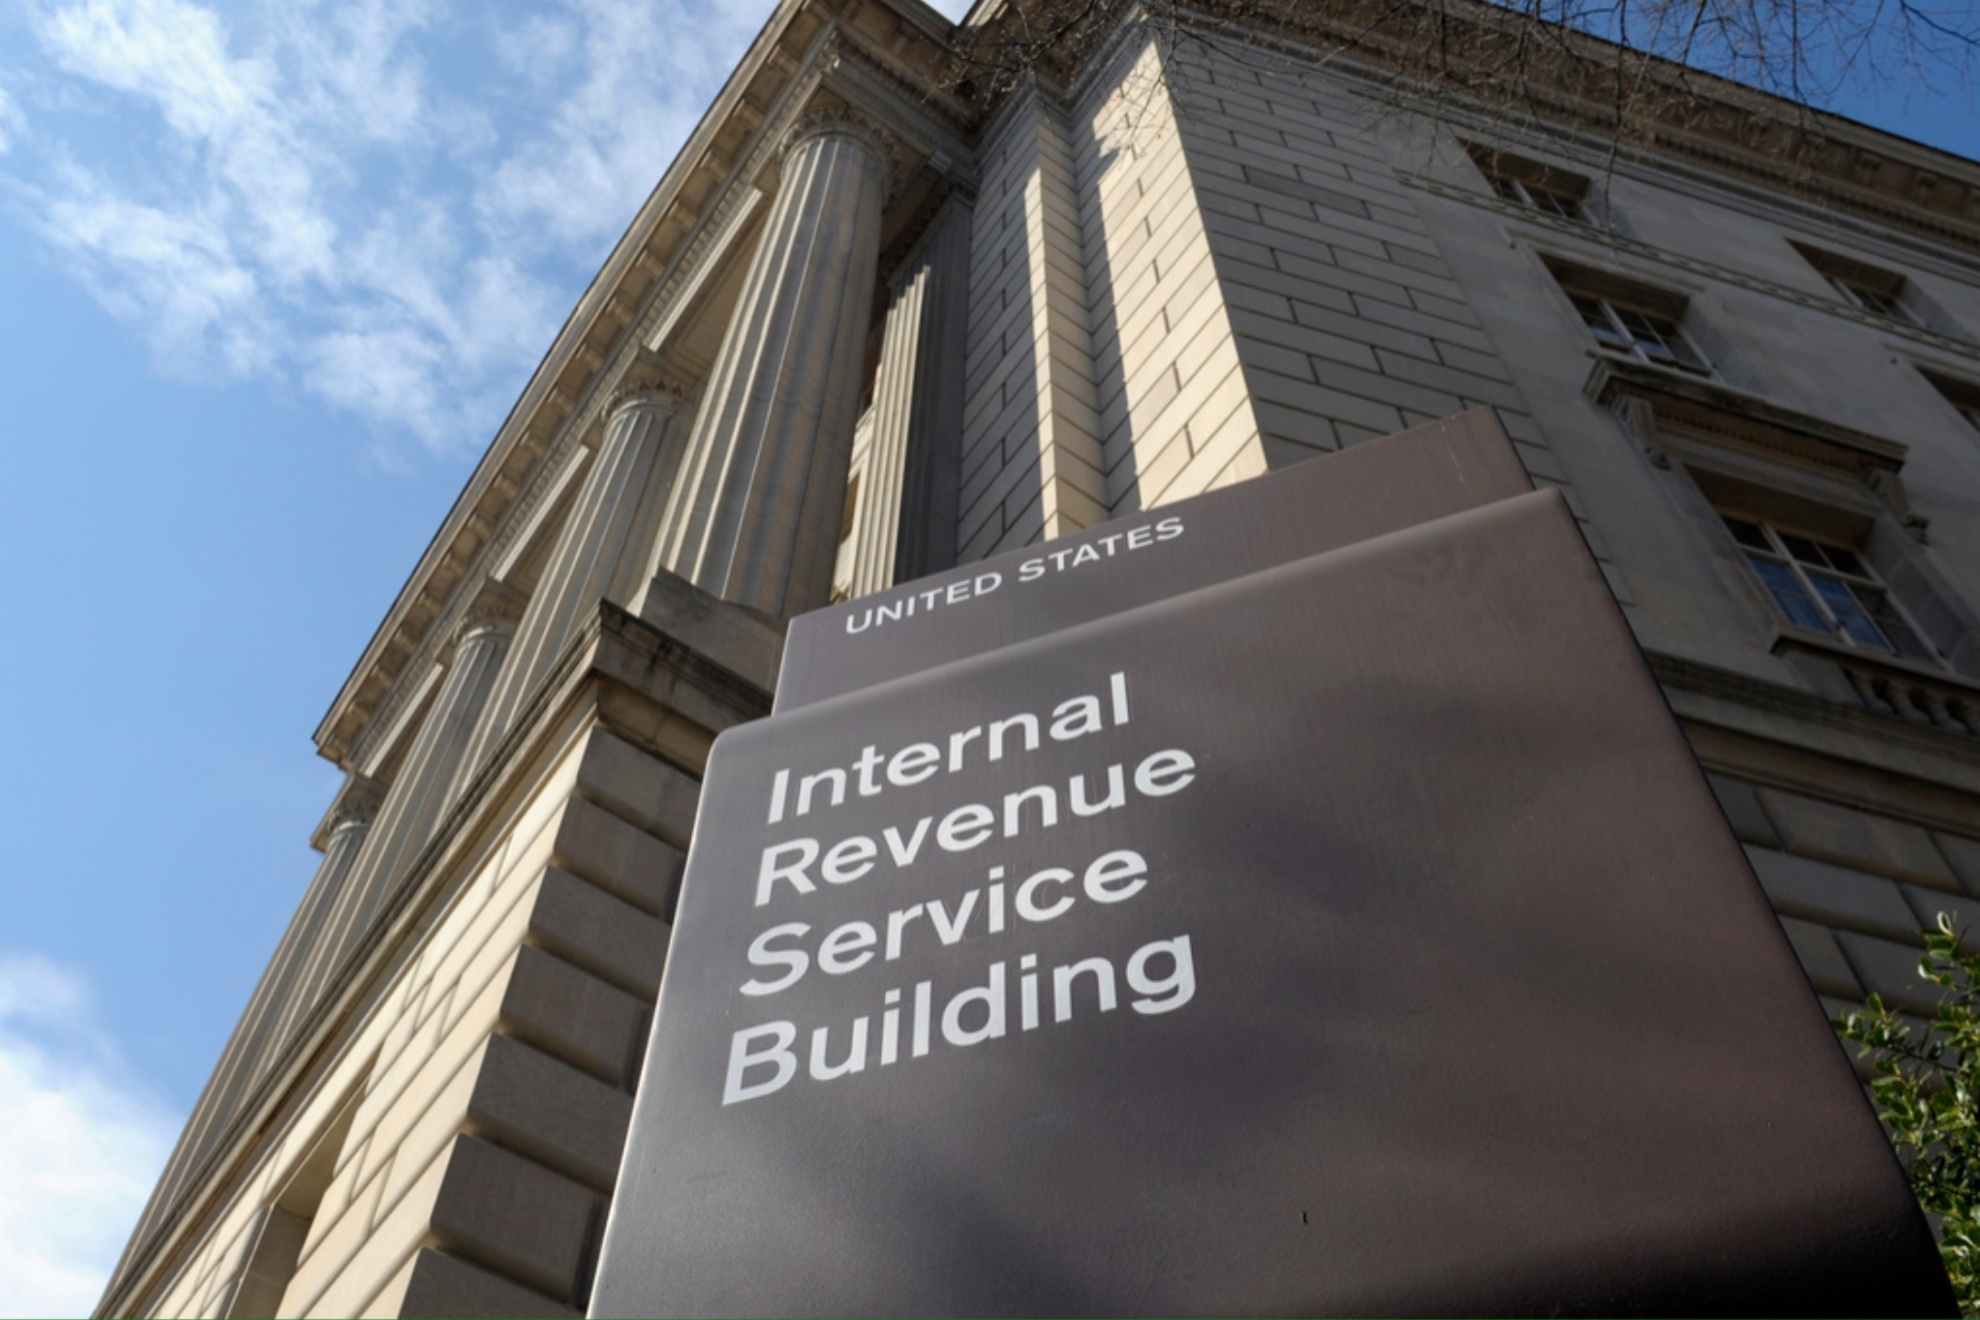 The IRS has minimum income thresholds for people that need to file taxes